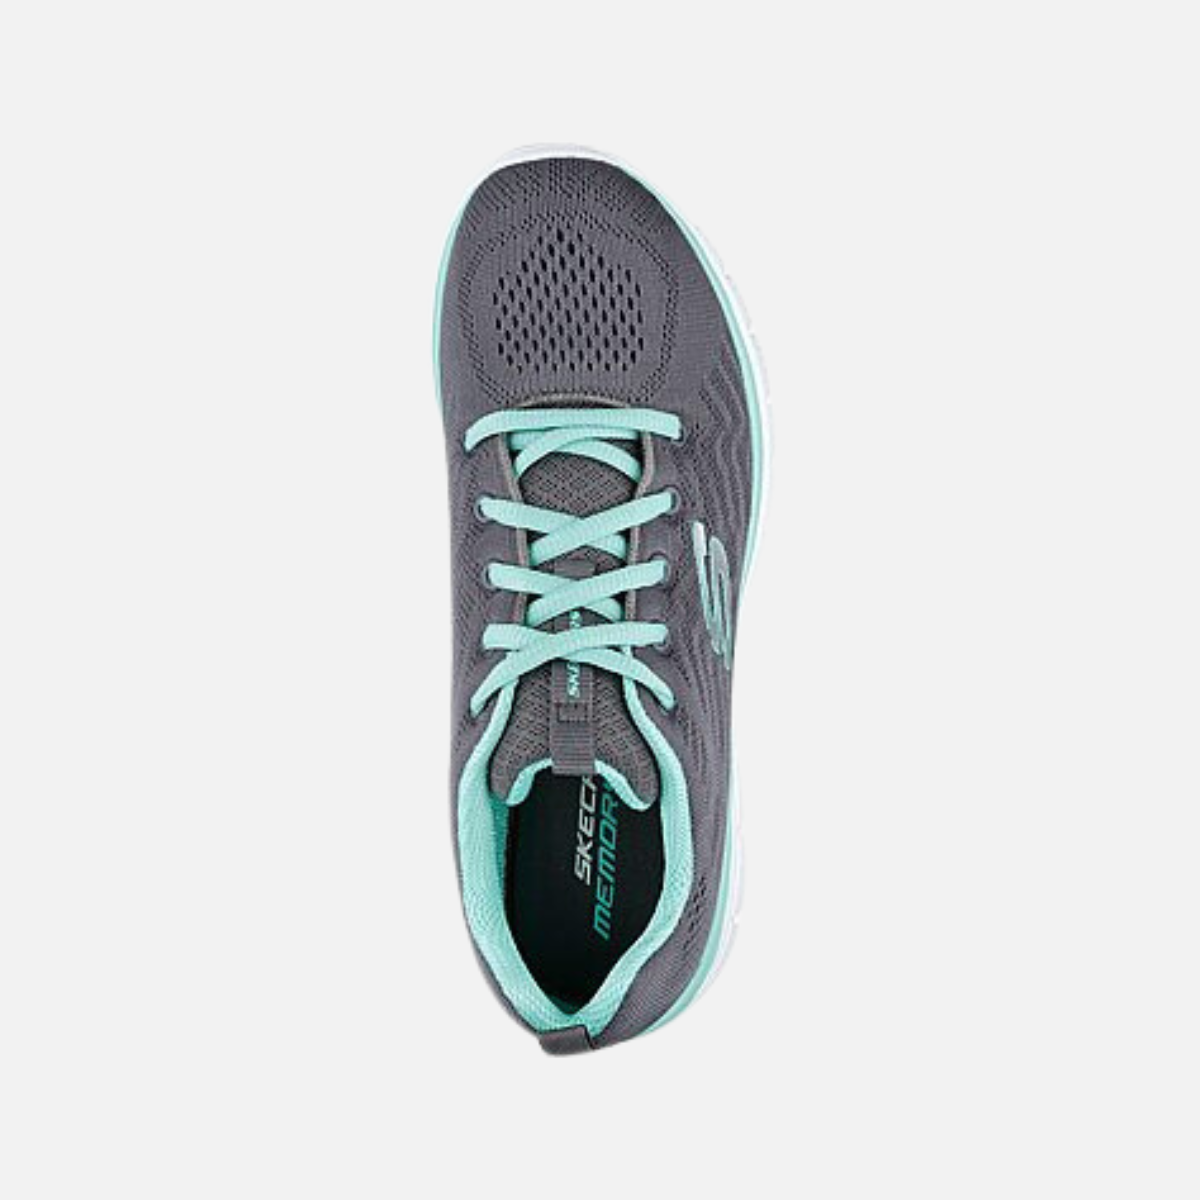 Skechers Graceful - Get Connected Women's Running Shoes -Charcoal/Green